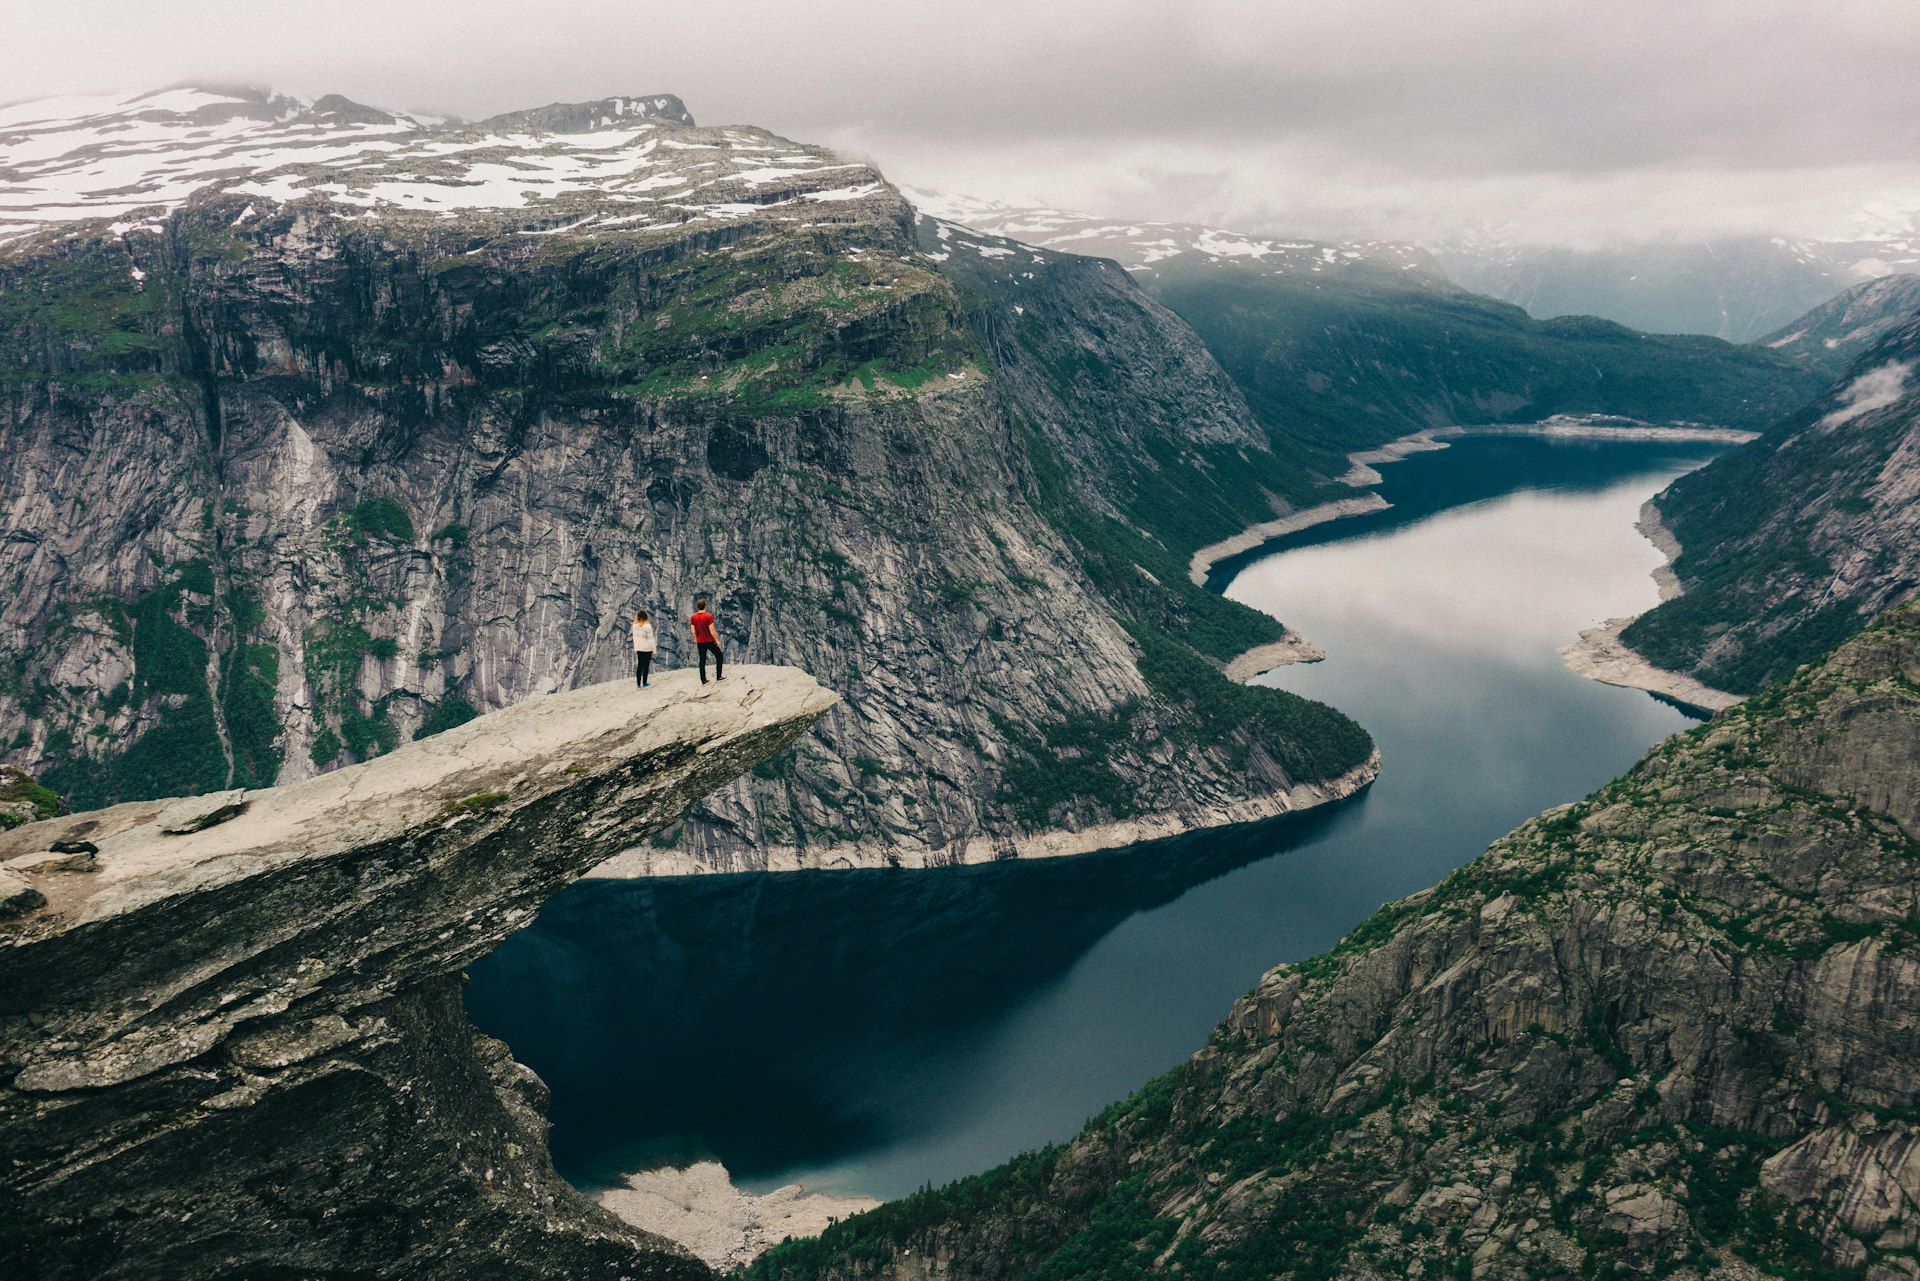 Two people standing on the Trolltunga, a large ledge of rock that juts out high above a fjord in Norway